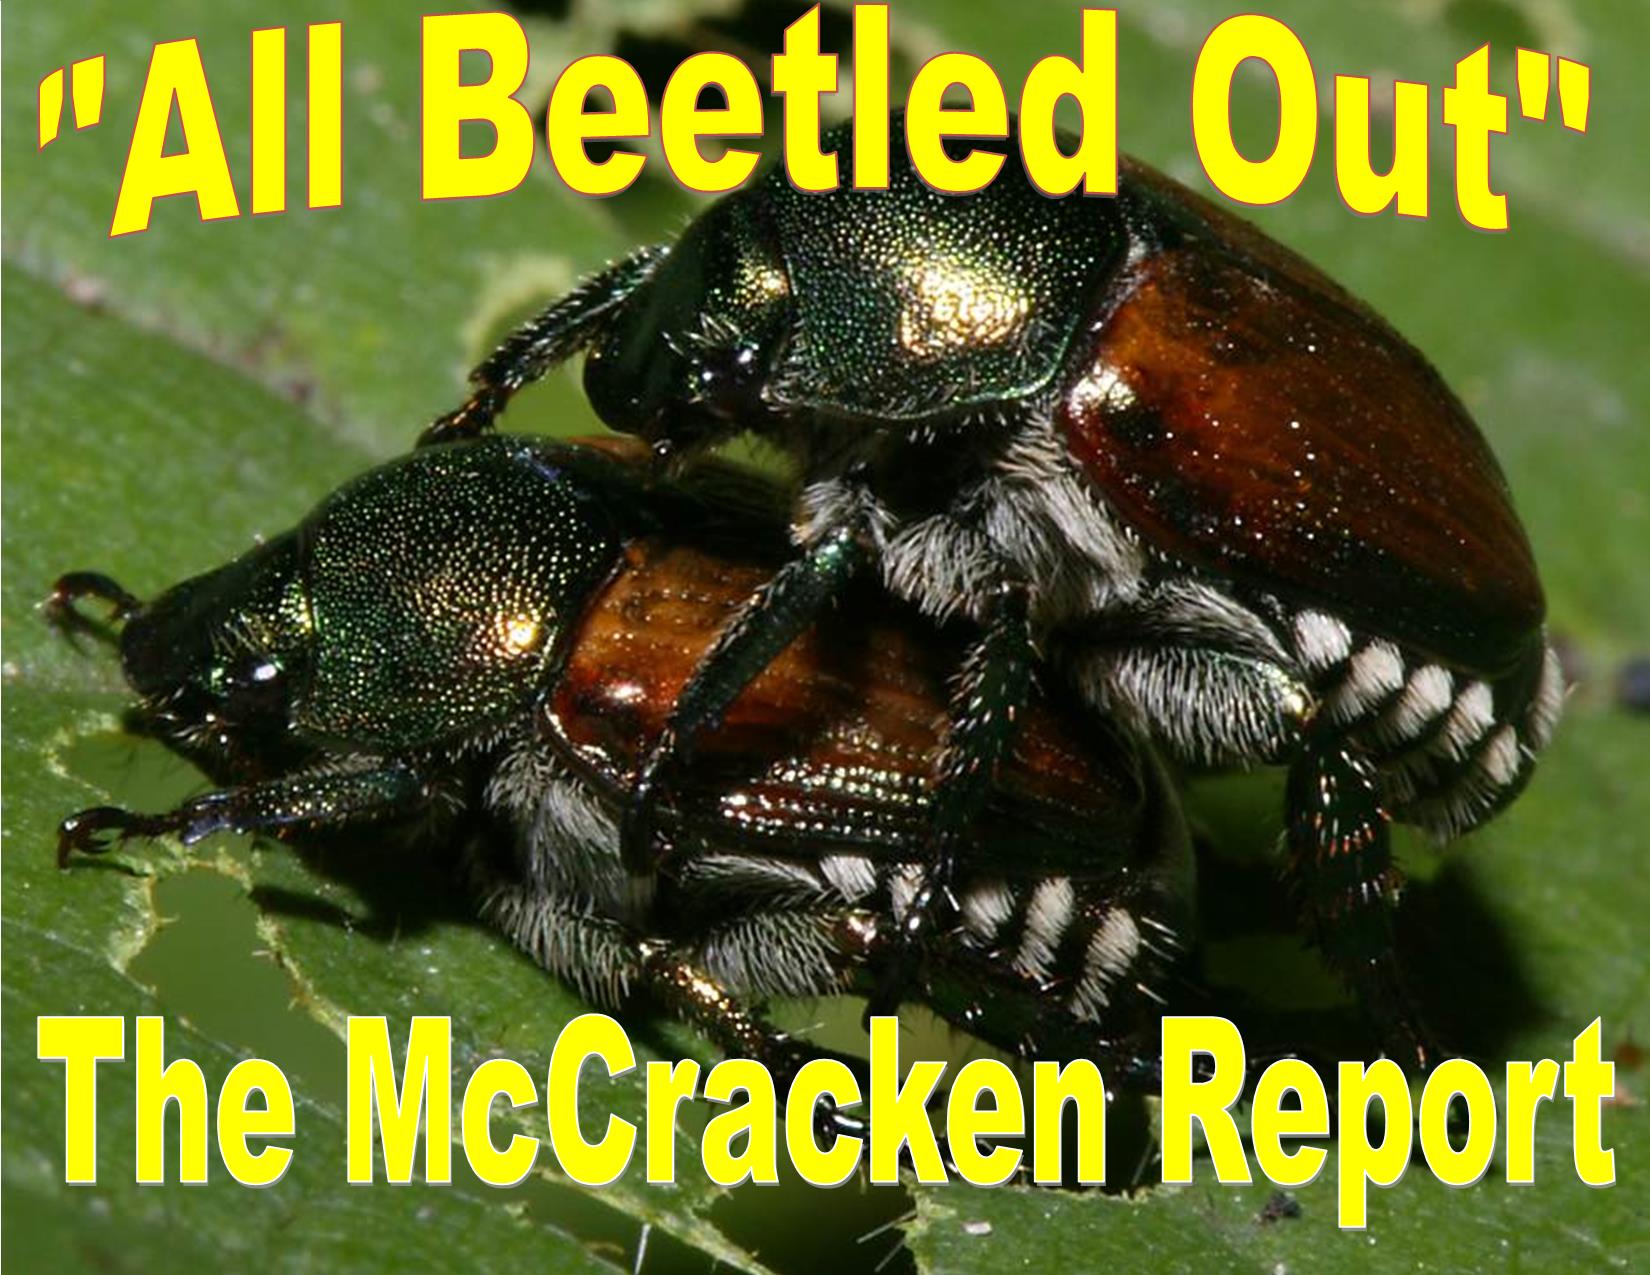 KWGA members Kevin Newcombe and Wayne Burke model the Life Cycle Mating habits of the dreaded Japanese Beetle.